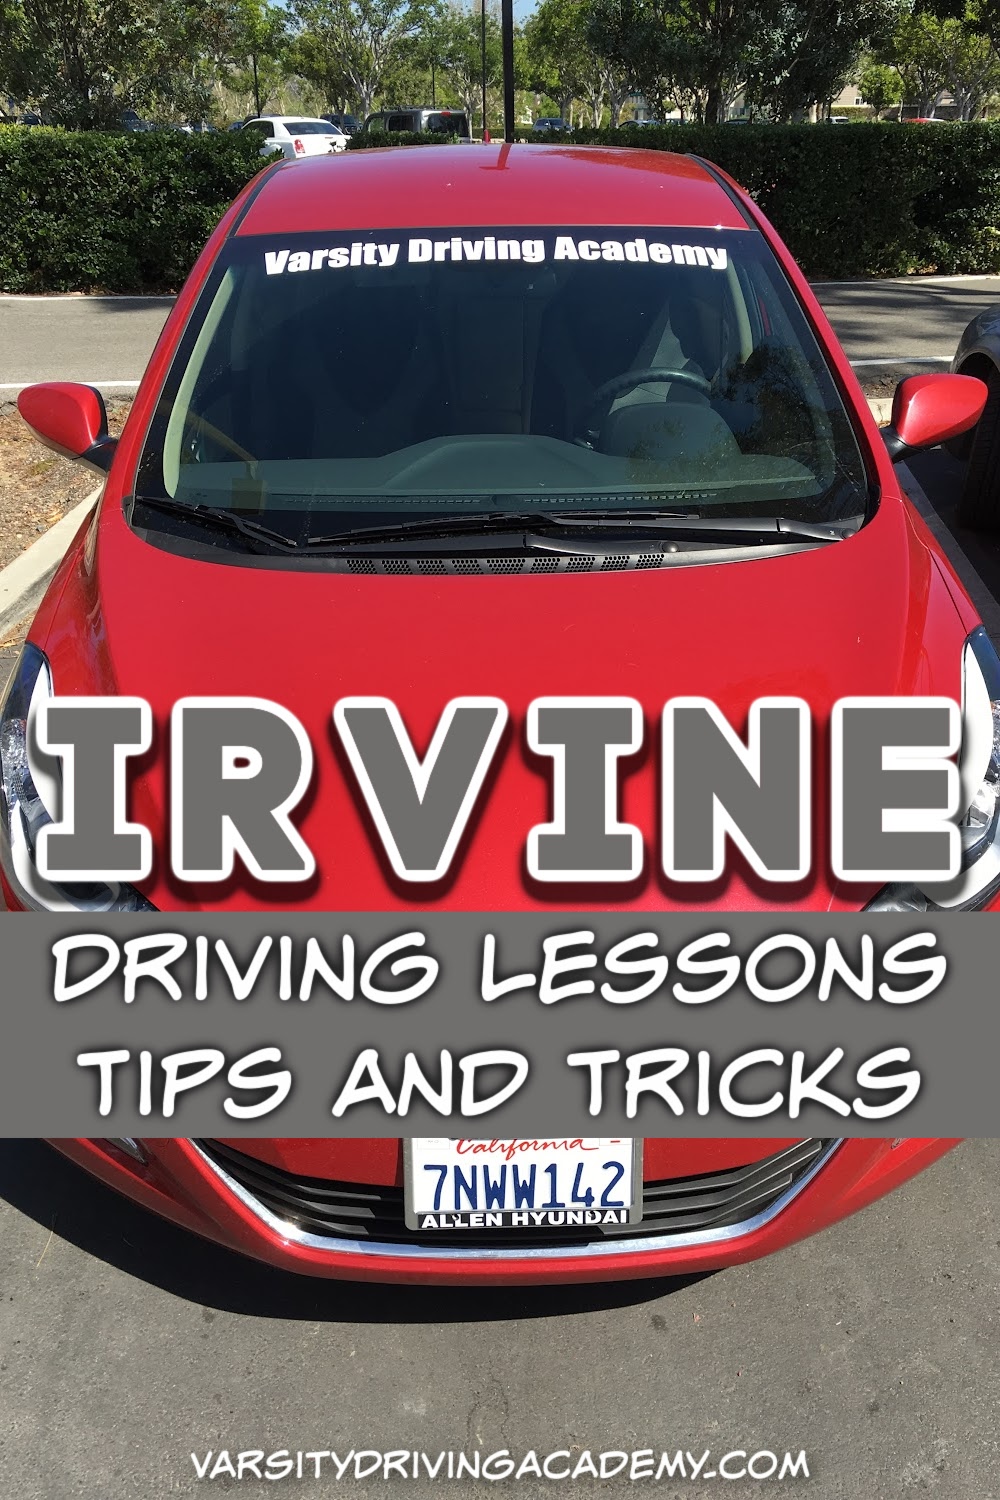 Use these Irvine driving lessons tips and tricks to help you learn how to drive at the best Irvine drivers ed for teens and adults; you can pass your DMV Behind the Wheel test the first time!